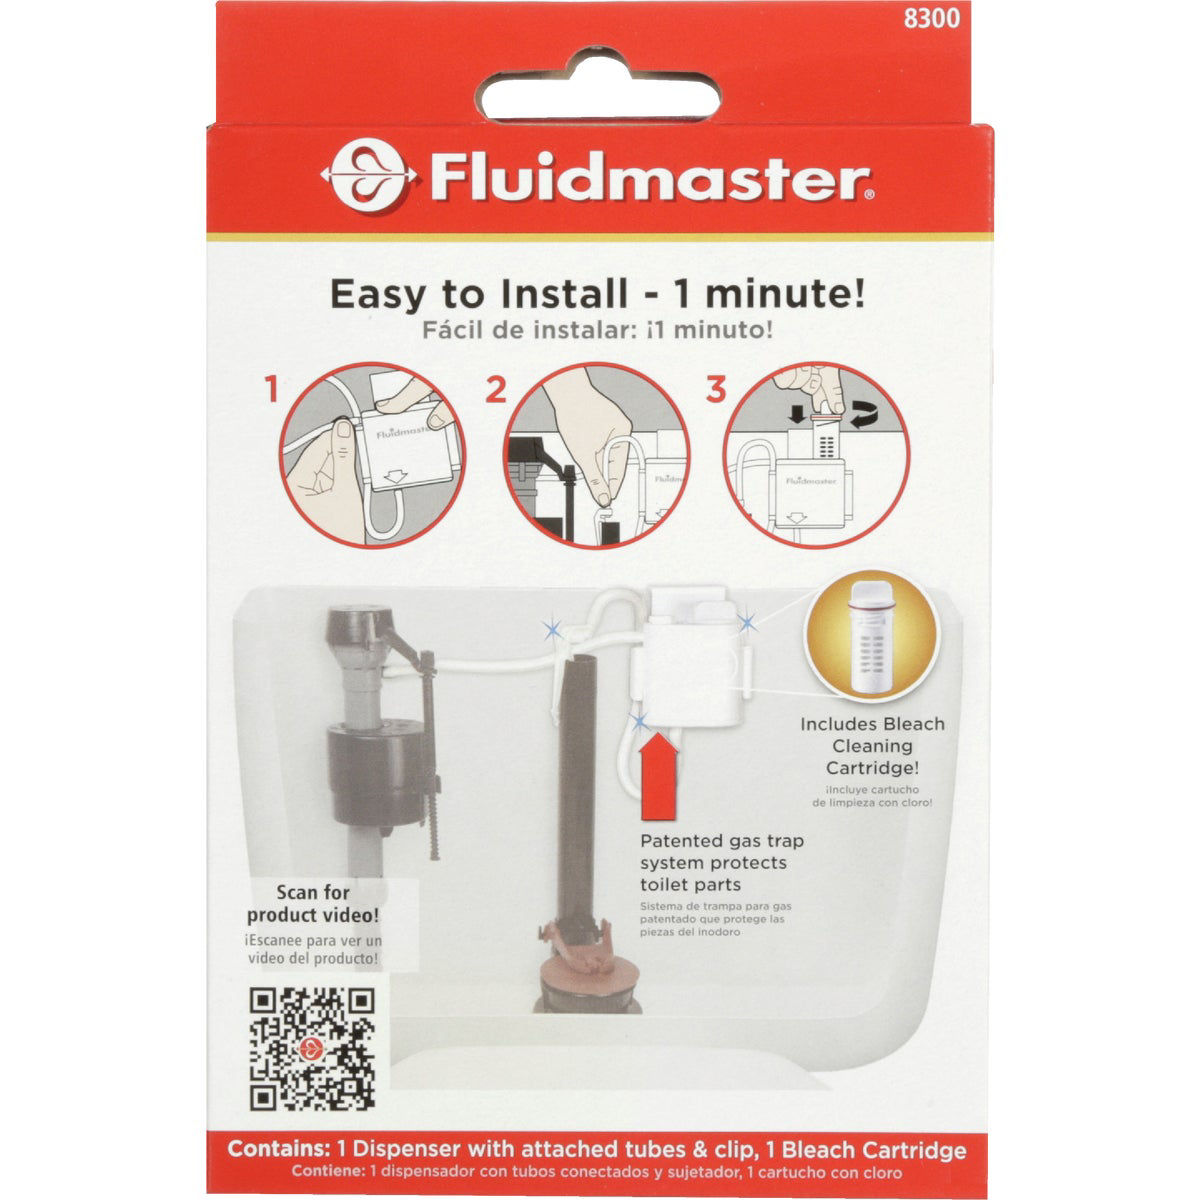 Toilet Bowl Cleaners, Automatic Toilet Cleaners, How to Clean a Toilet, Fluidmaster Flush 'n Sparkle